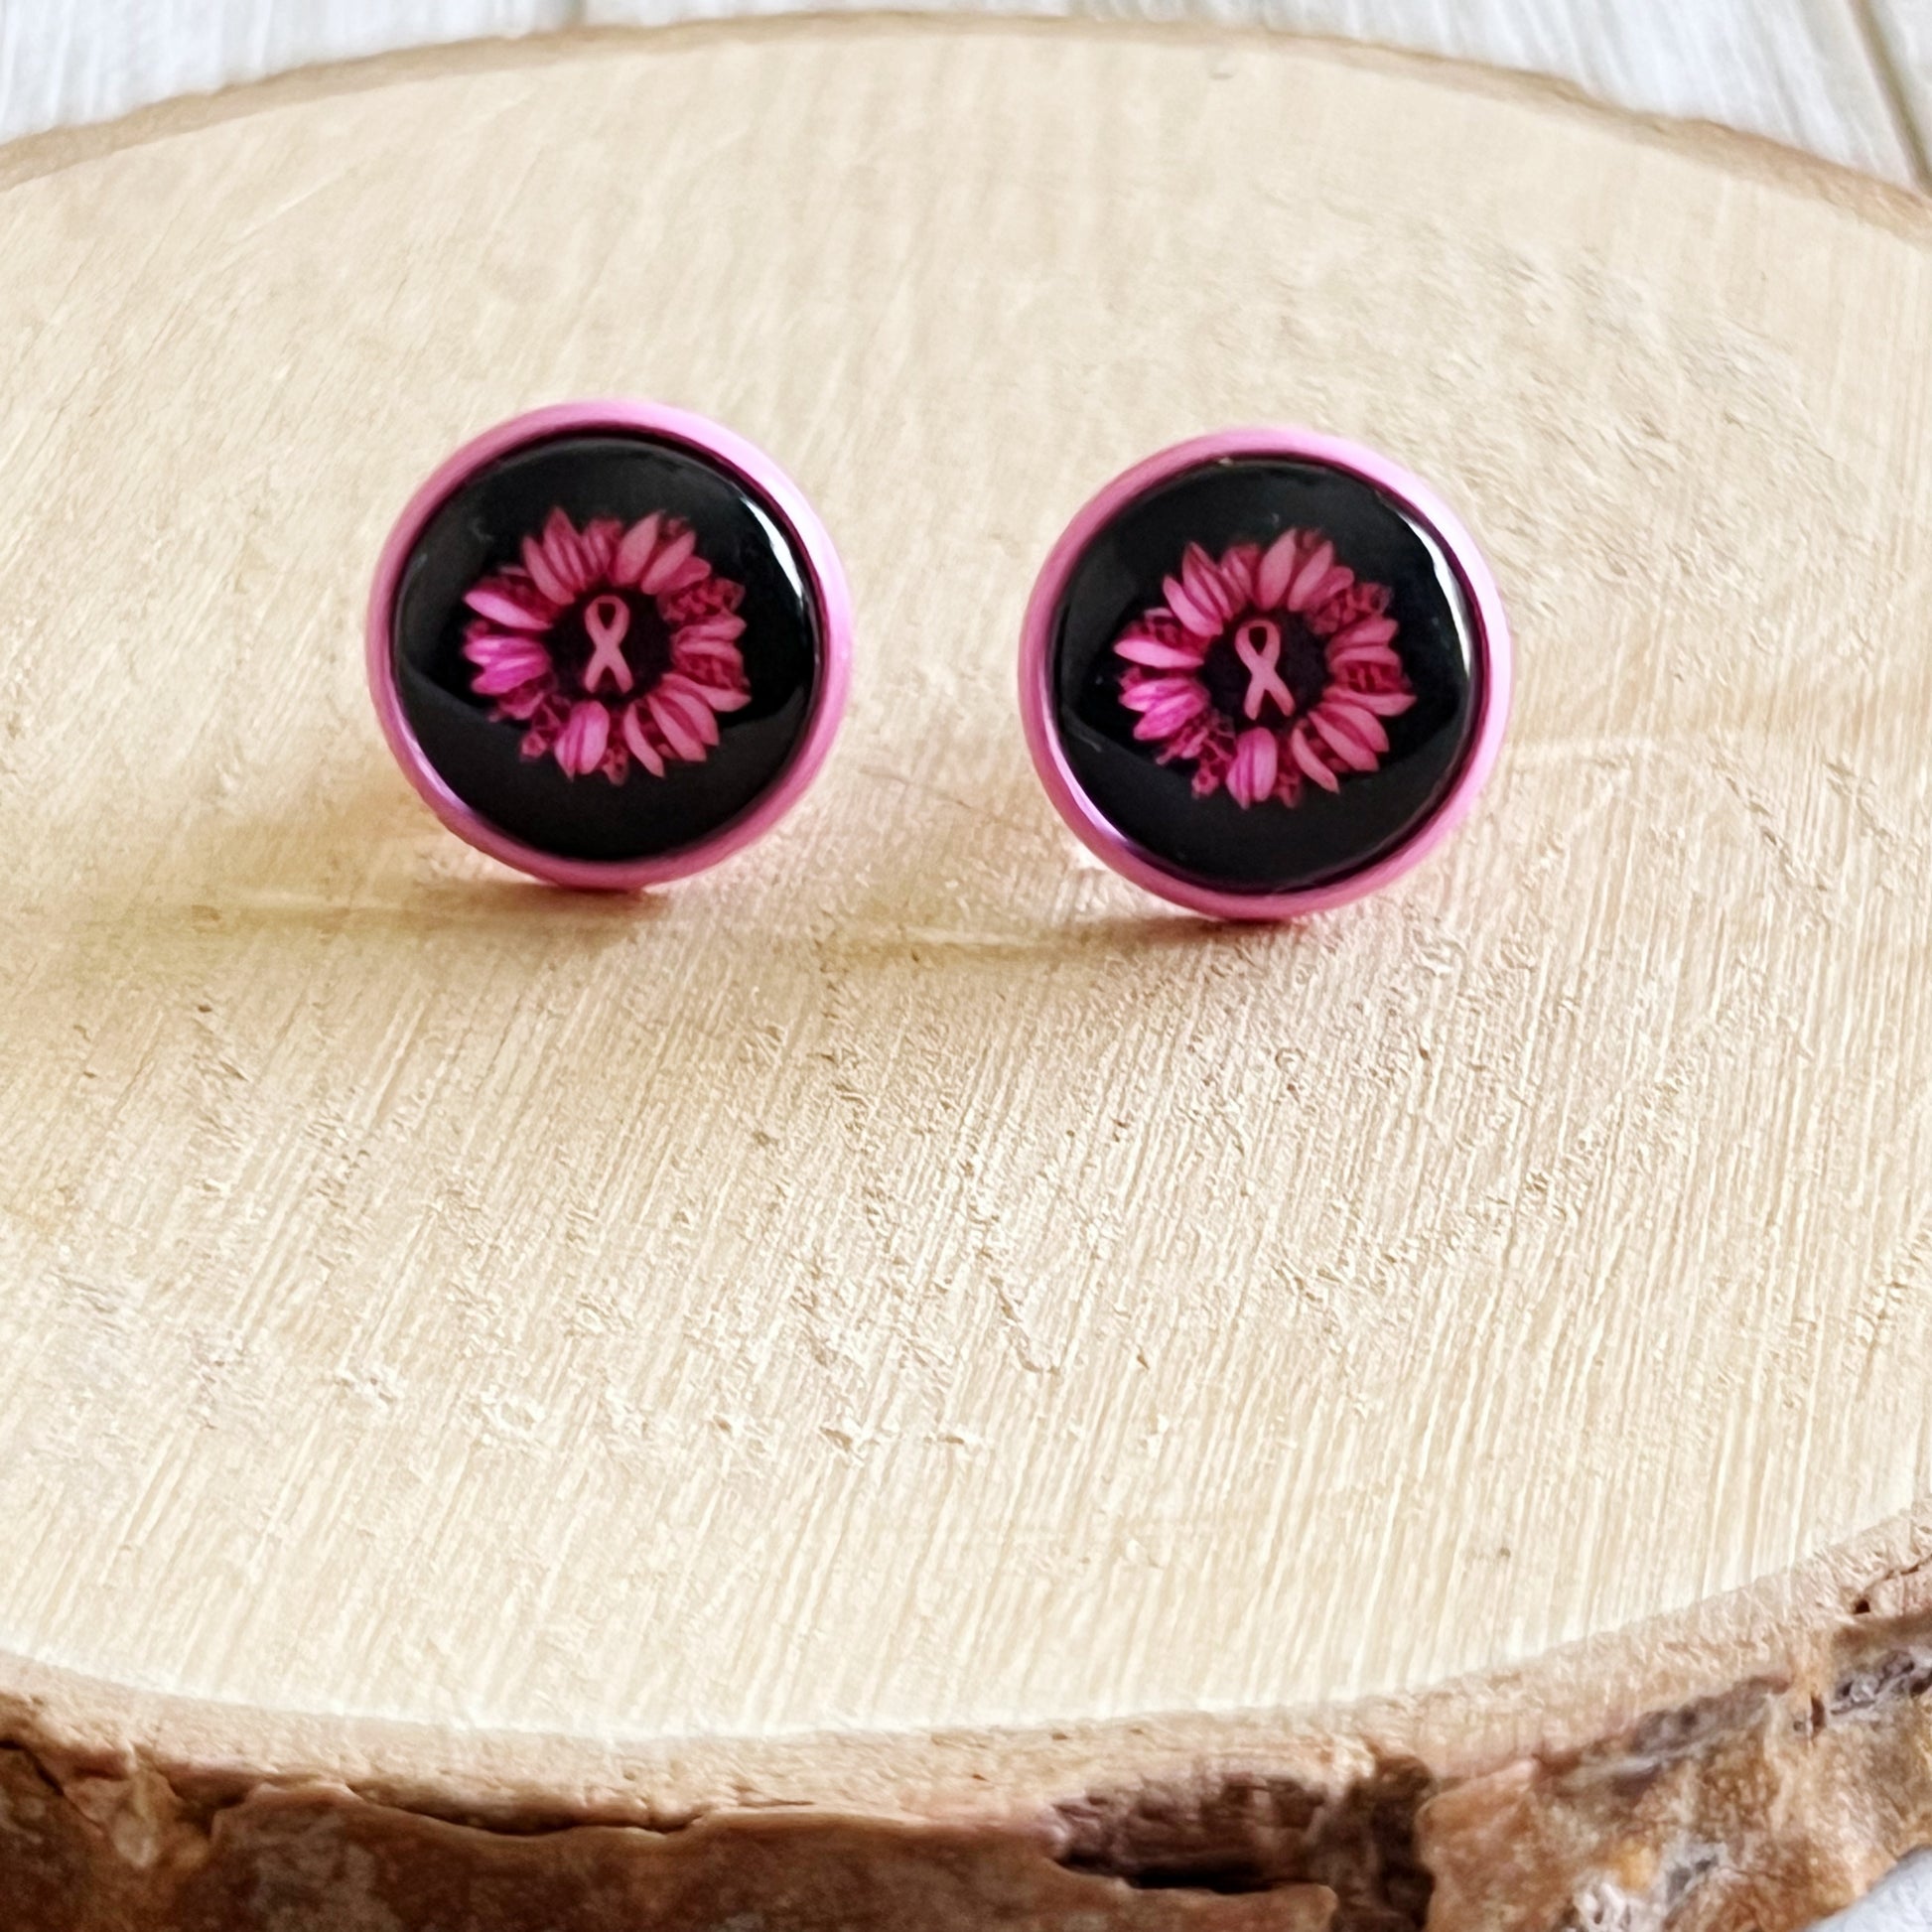 Breast Cancer Awareness Pink Sunflower Stud Earrings - Stylish and Supportive Accessories